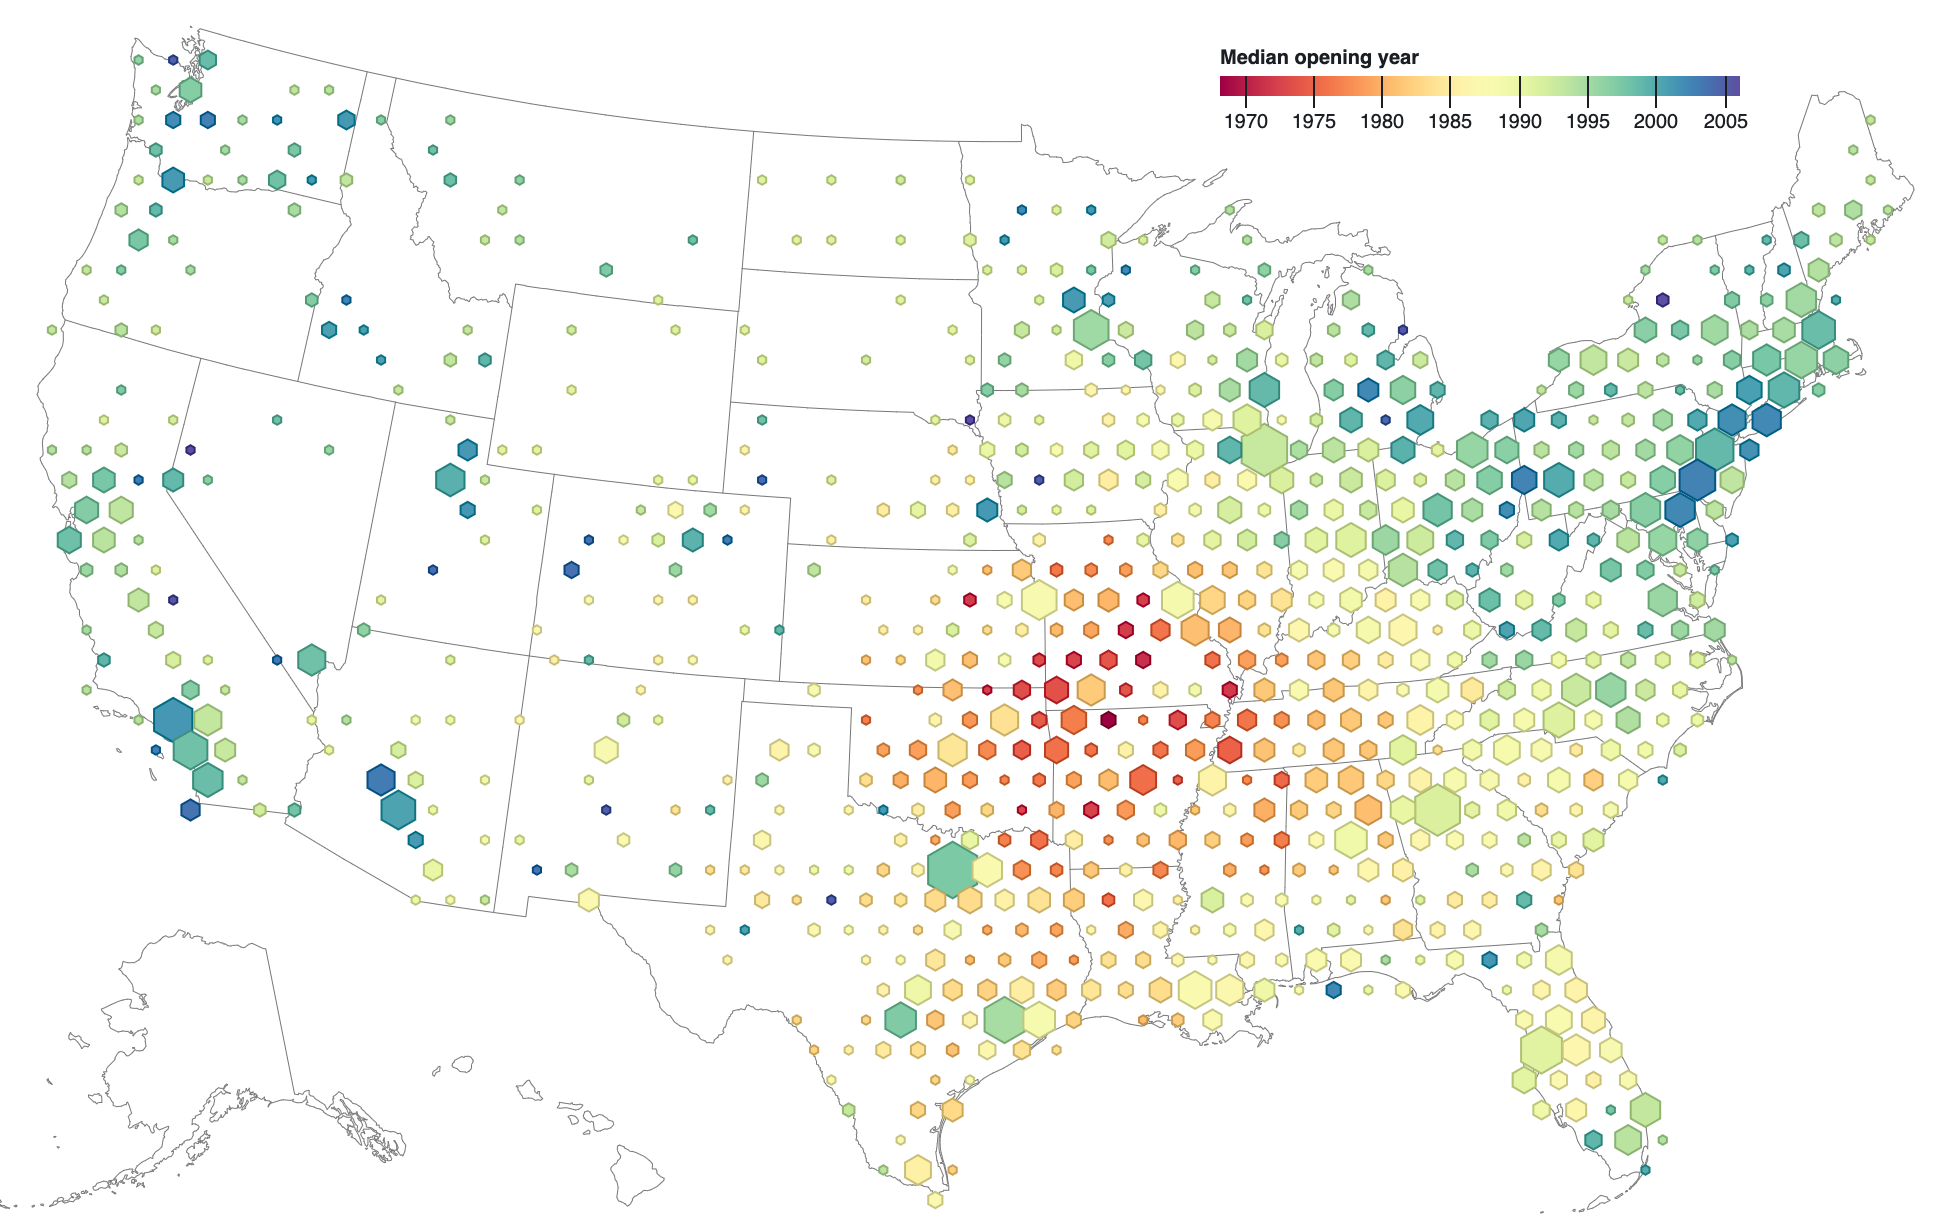 A hexbin map showing the median opening year of the Walmart stores in each hexagon. The size of each hexagon is proportional to the number of stores in each hexagon